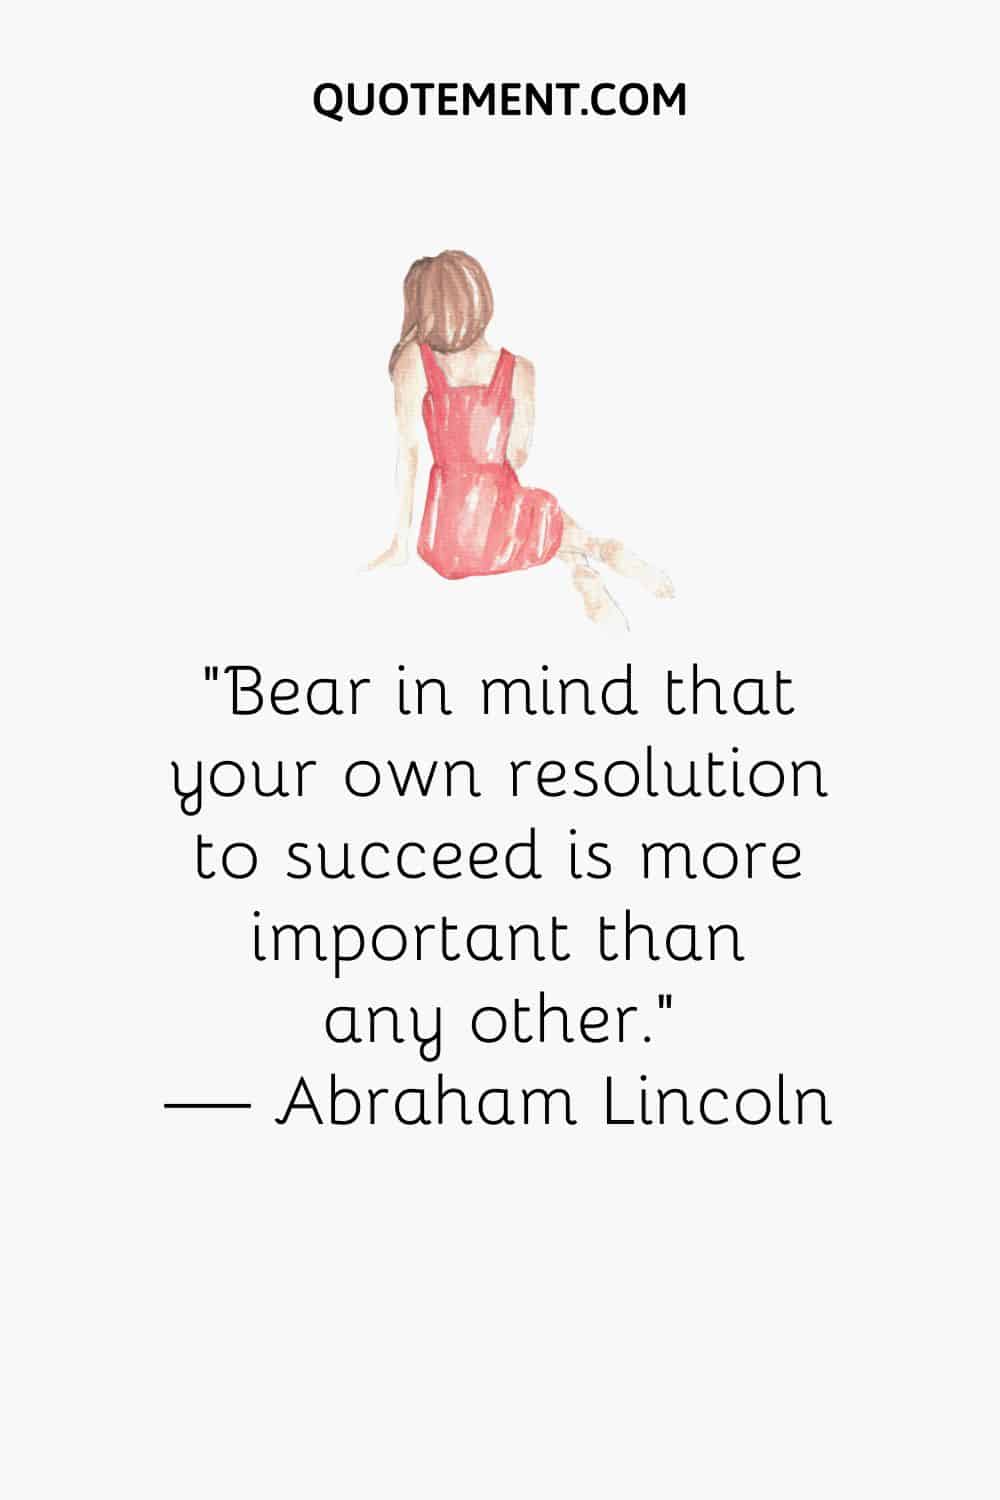 Bear in mind that your own resolution to succeed is more important than any other